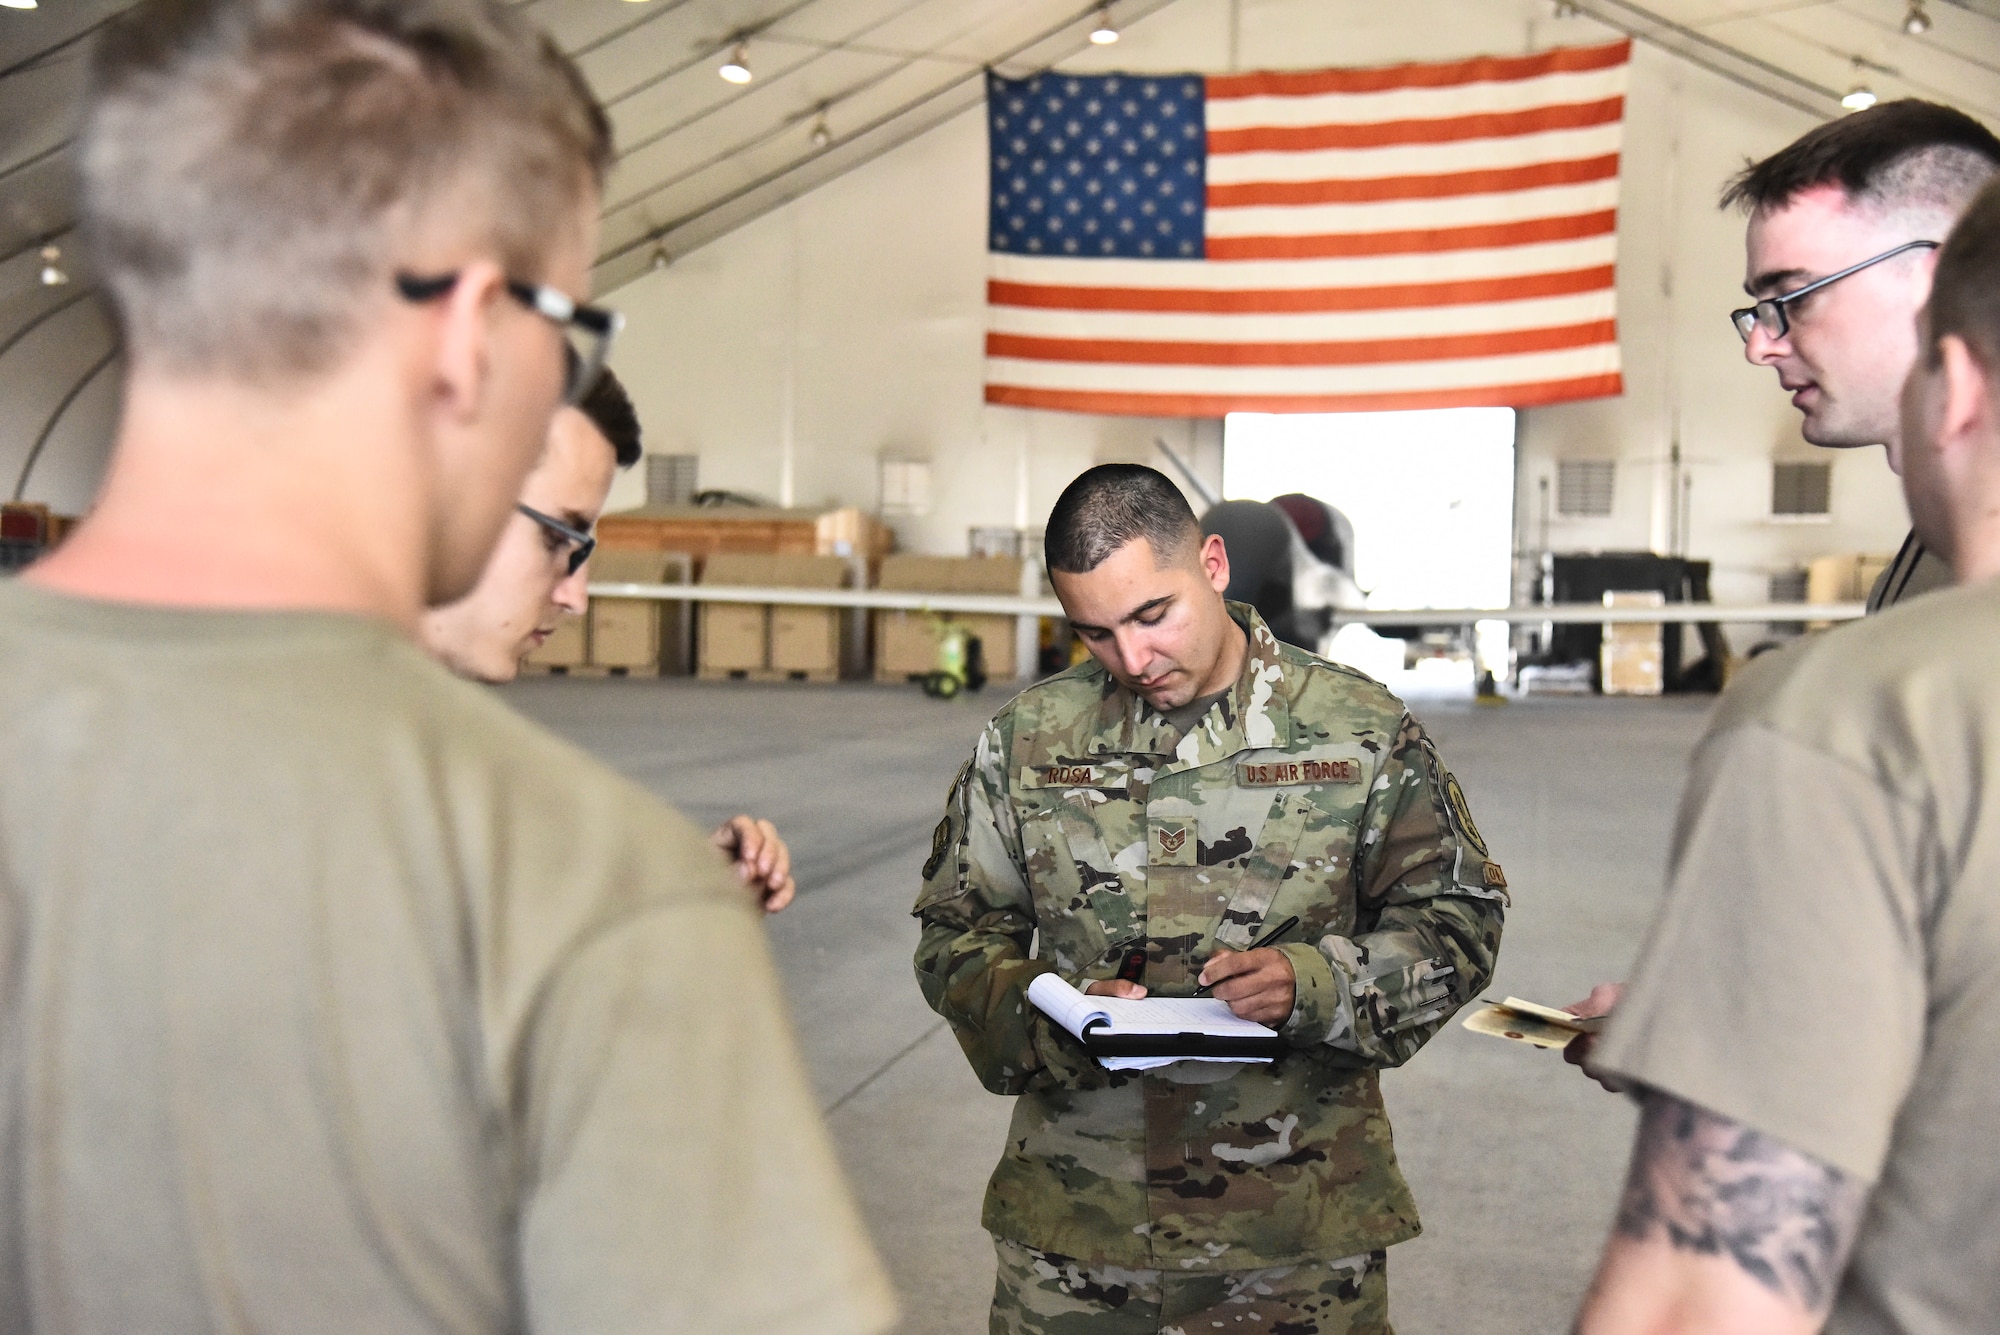 Staff Sgt. Luis Rosa, 380th Expeditionary Maintenance Group RQ-4 Global Hawk and U-2 Dragon Lady quality assurance inspector, inspects an RQ-4 Global Hawk maintenance crew at Al Dhafra Air Base, United Arab Emirates, March 12, 2019. The QA staff evaluates the quality of maintenance accomplished and performs necessary functions to manage the Maintenance Standardization Evaluation Program. (U.S. Air Force photo by Senior Airman Mya M. Crosby)